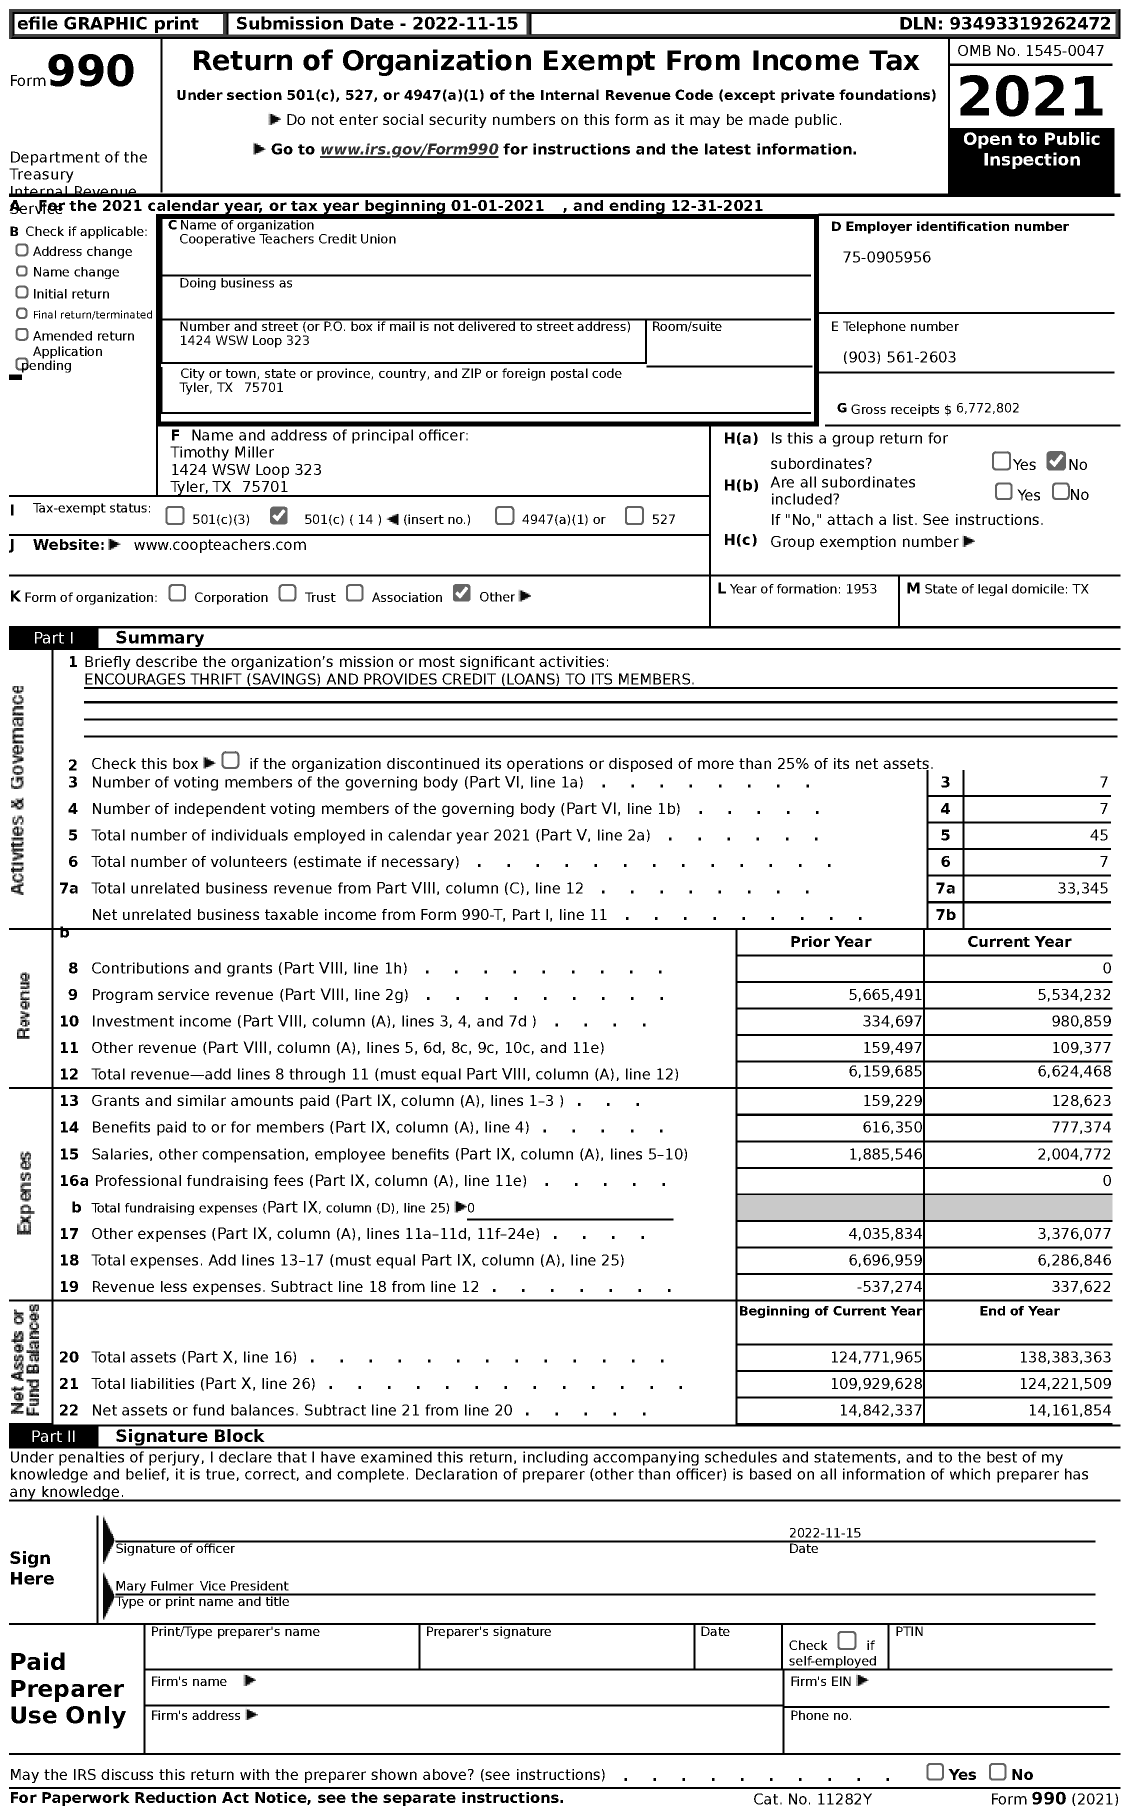 Image of first page of 2021 Form 990 for Cooperative Teachers Credit Union (CTCU)